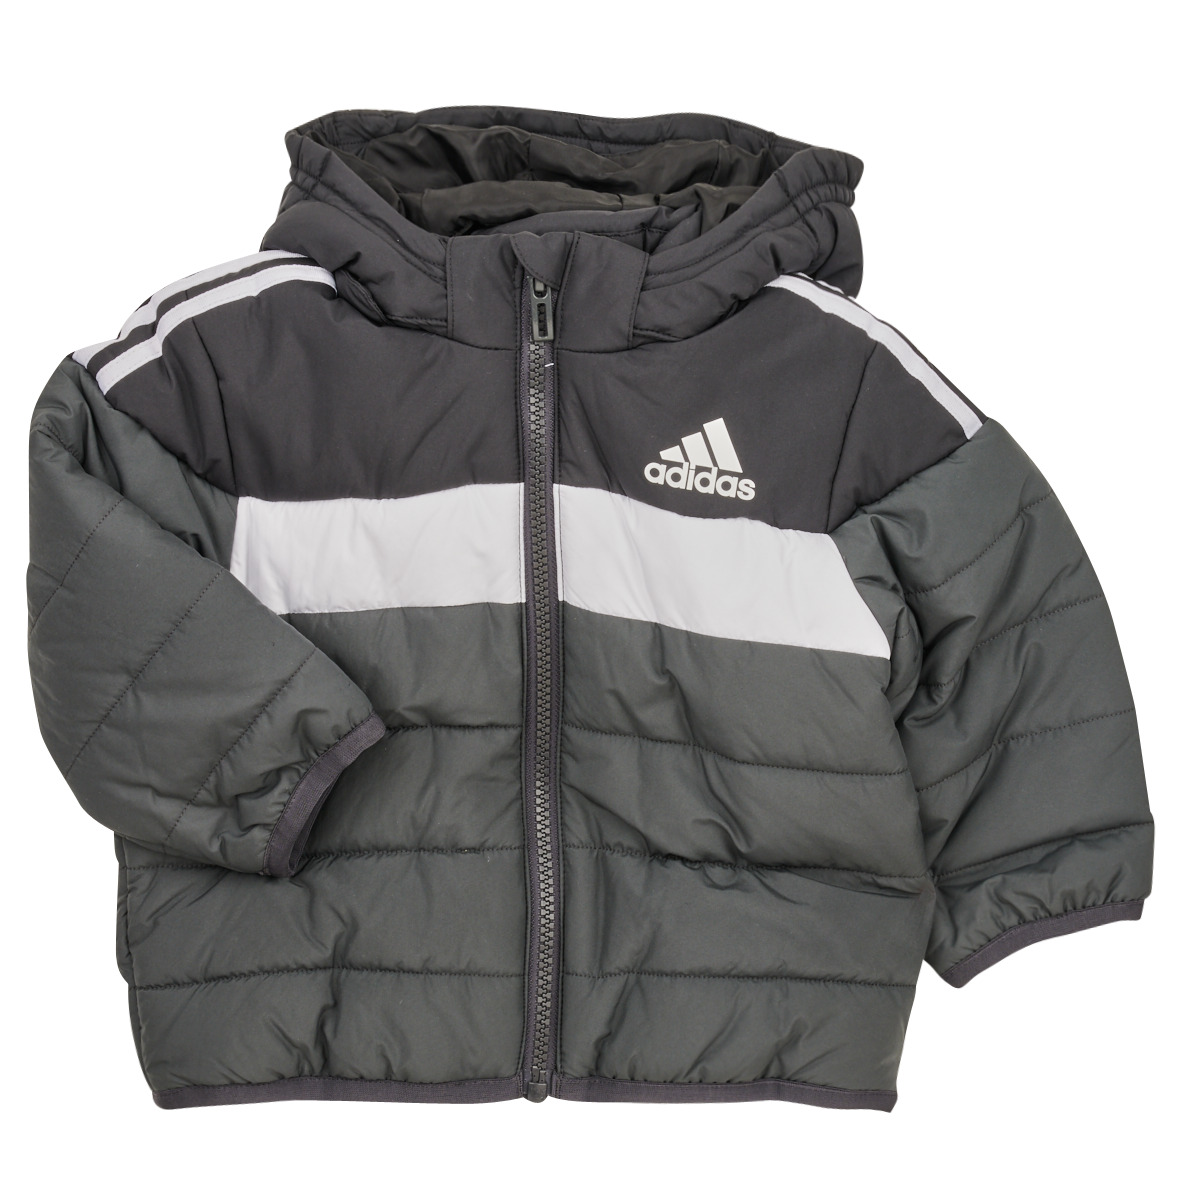 Adidas Sportswear IN - NET Free PAD coats | F Child Duffel - Spartoo JKT delivery Clothing ! Black